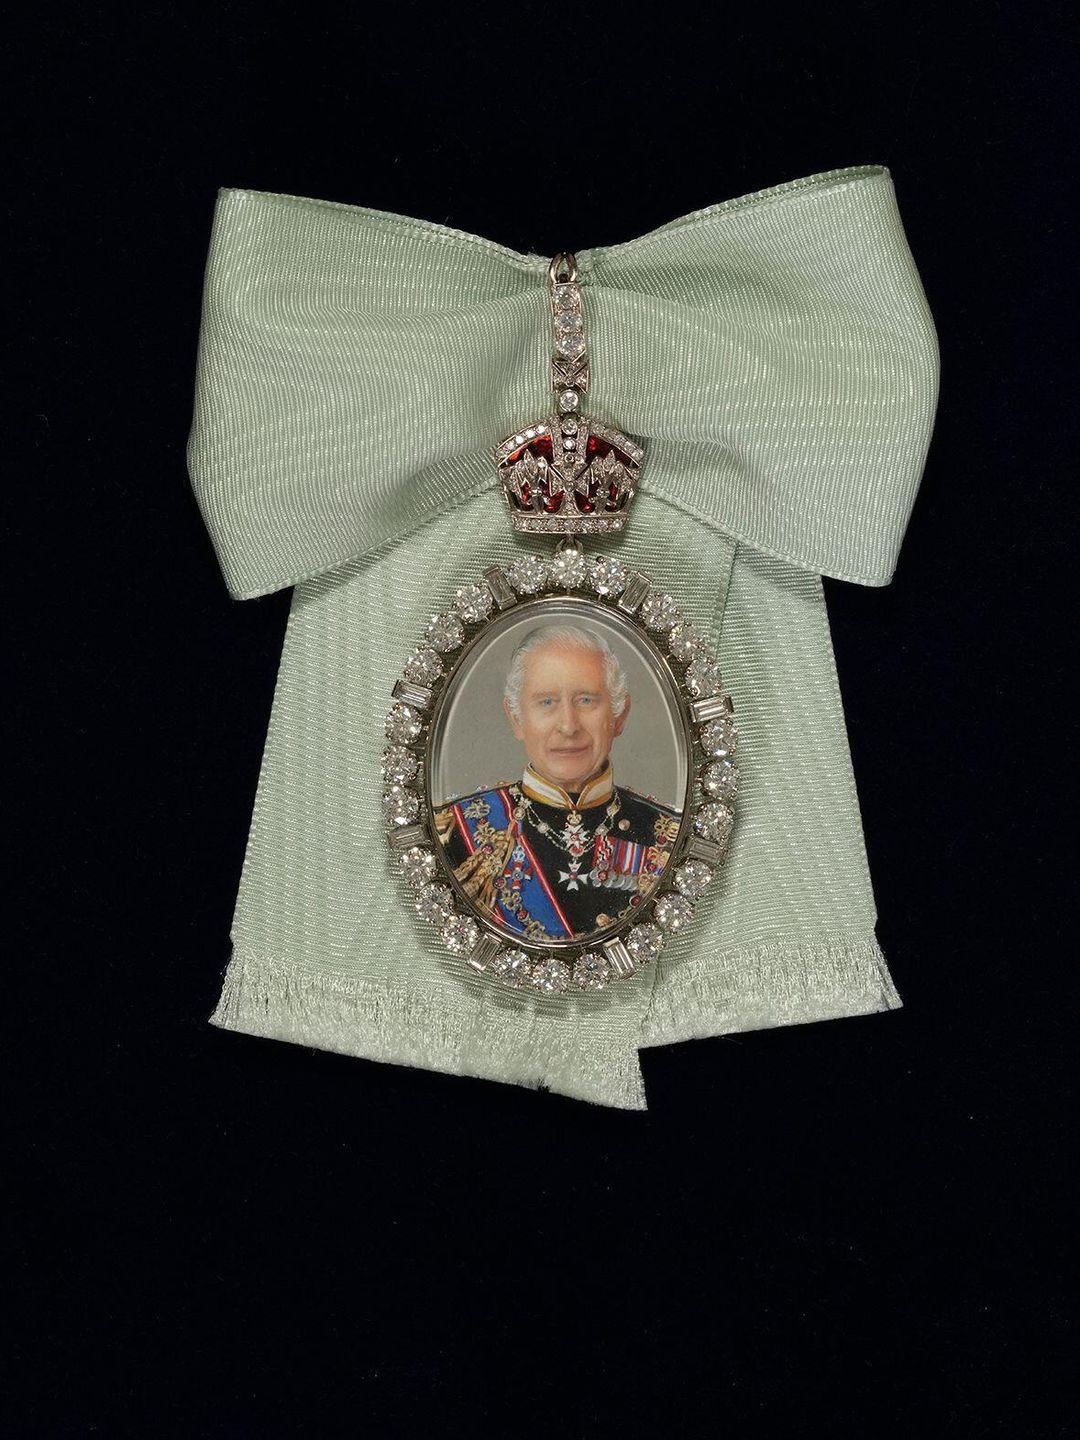 A close-up of King Charles's family order